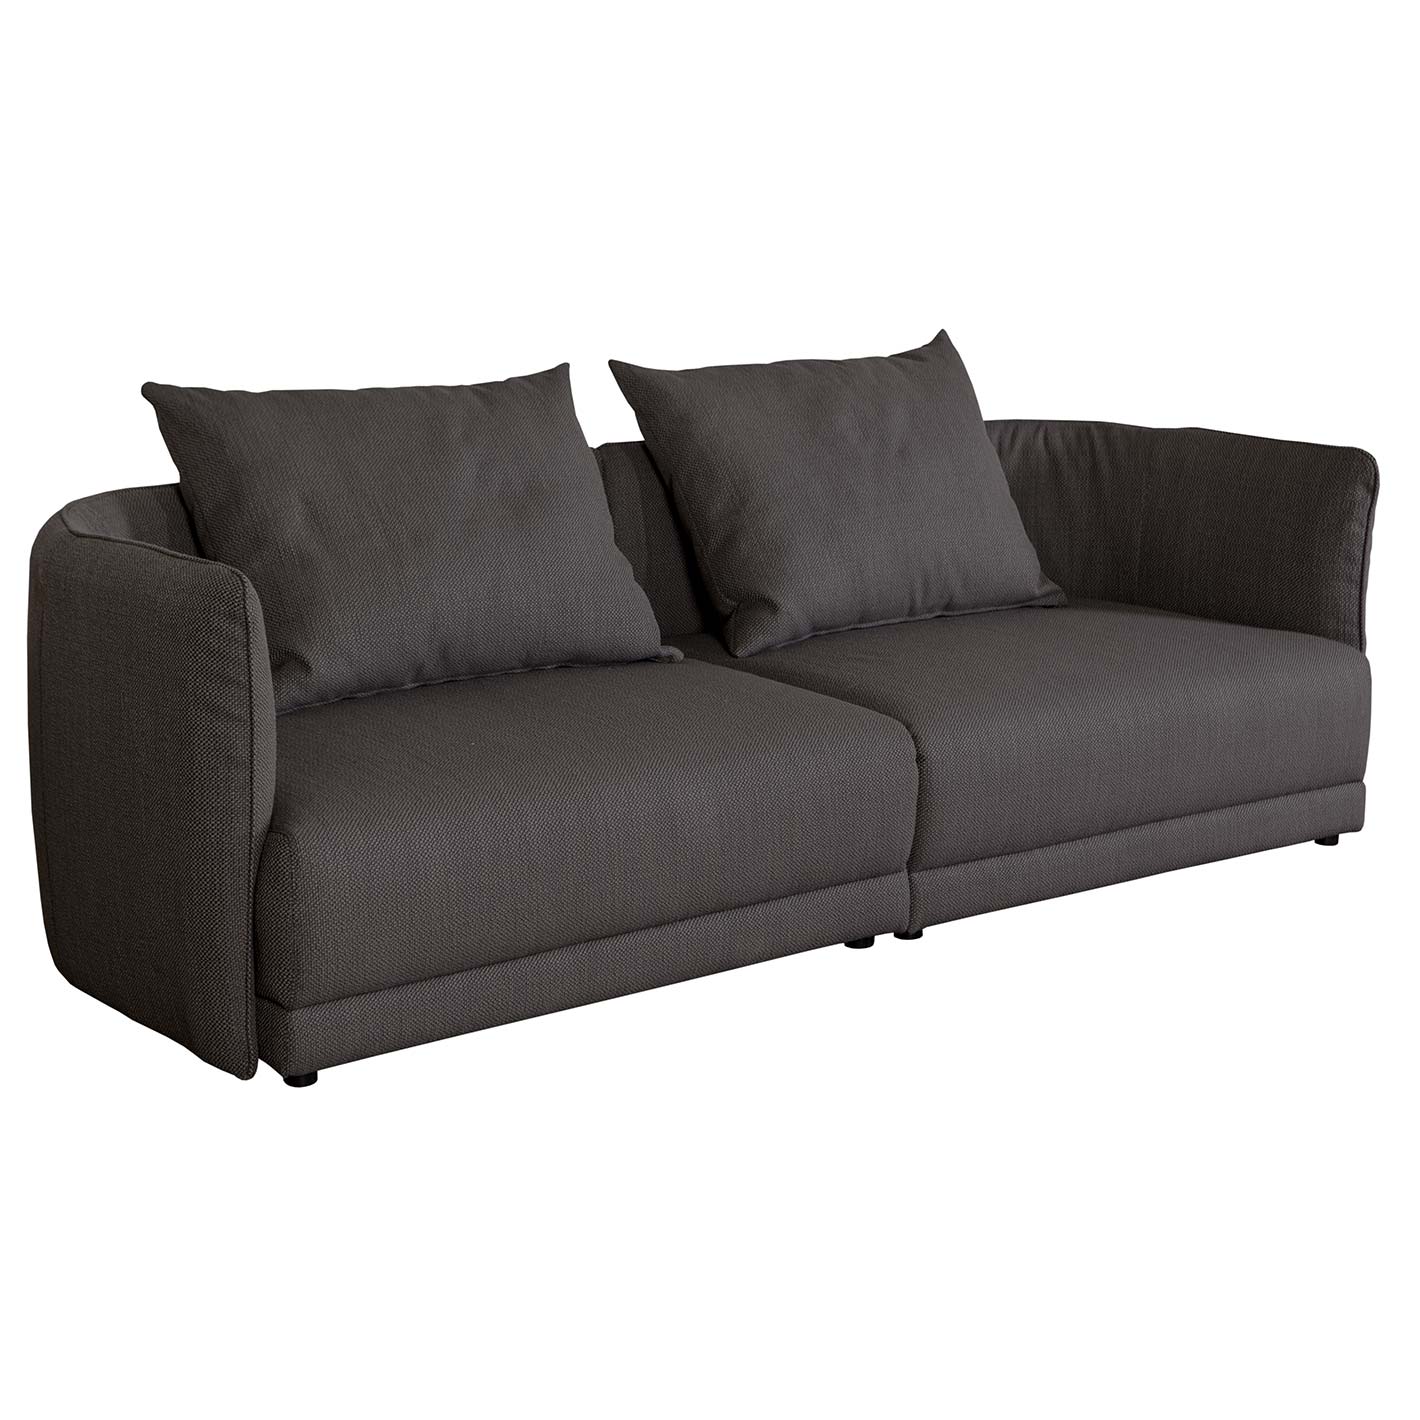 Sofas im Outlet - BUSINESS Einzelsofa